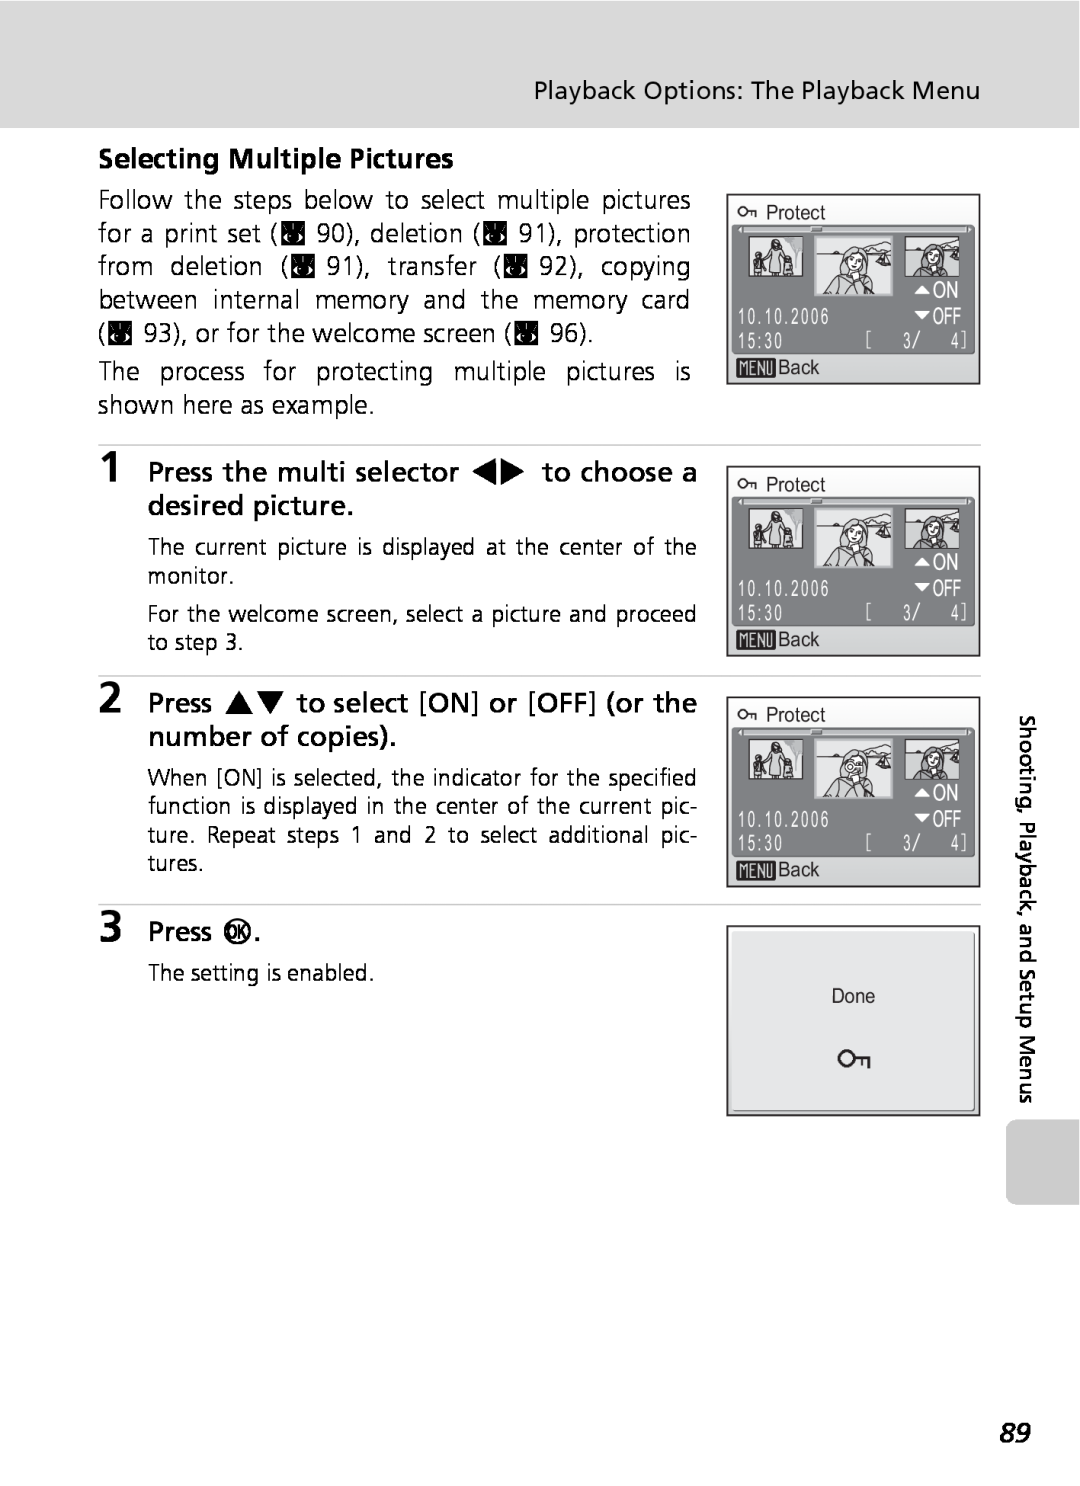 Nikon COOLPIXS9 Selecting Multiple Pictures, Press the multi selector IJ to choose a, desired picture, number of copies 